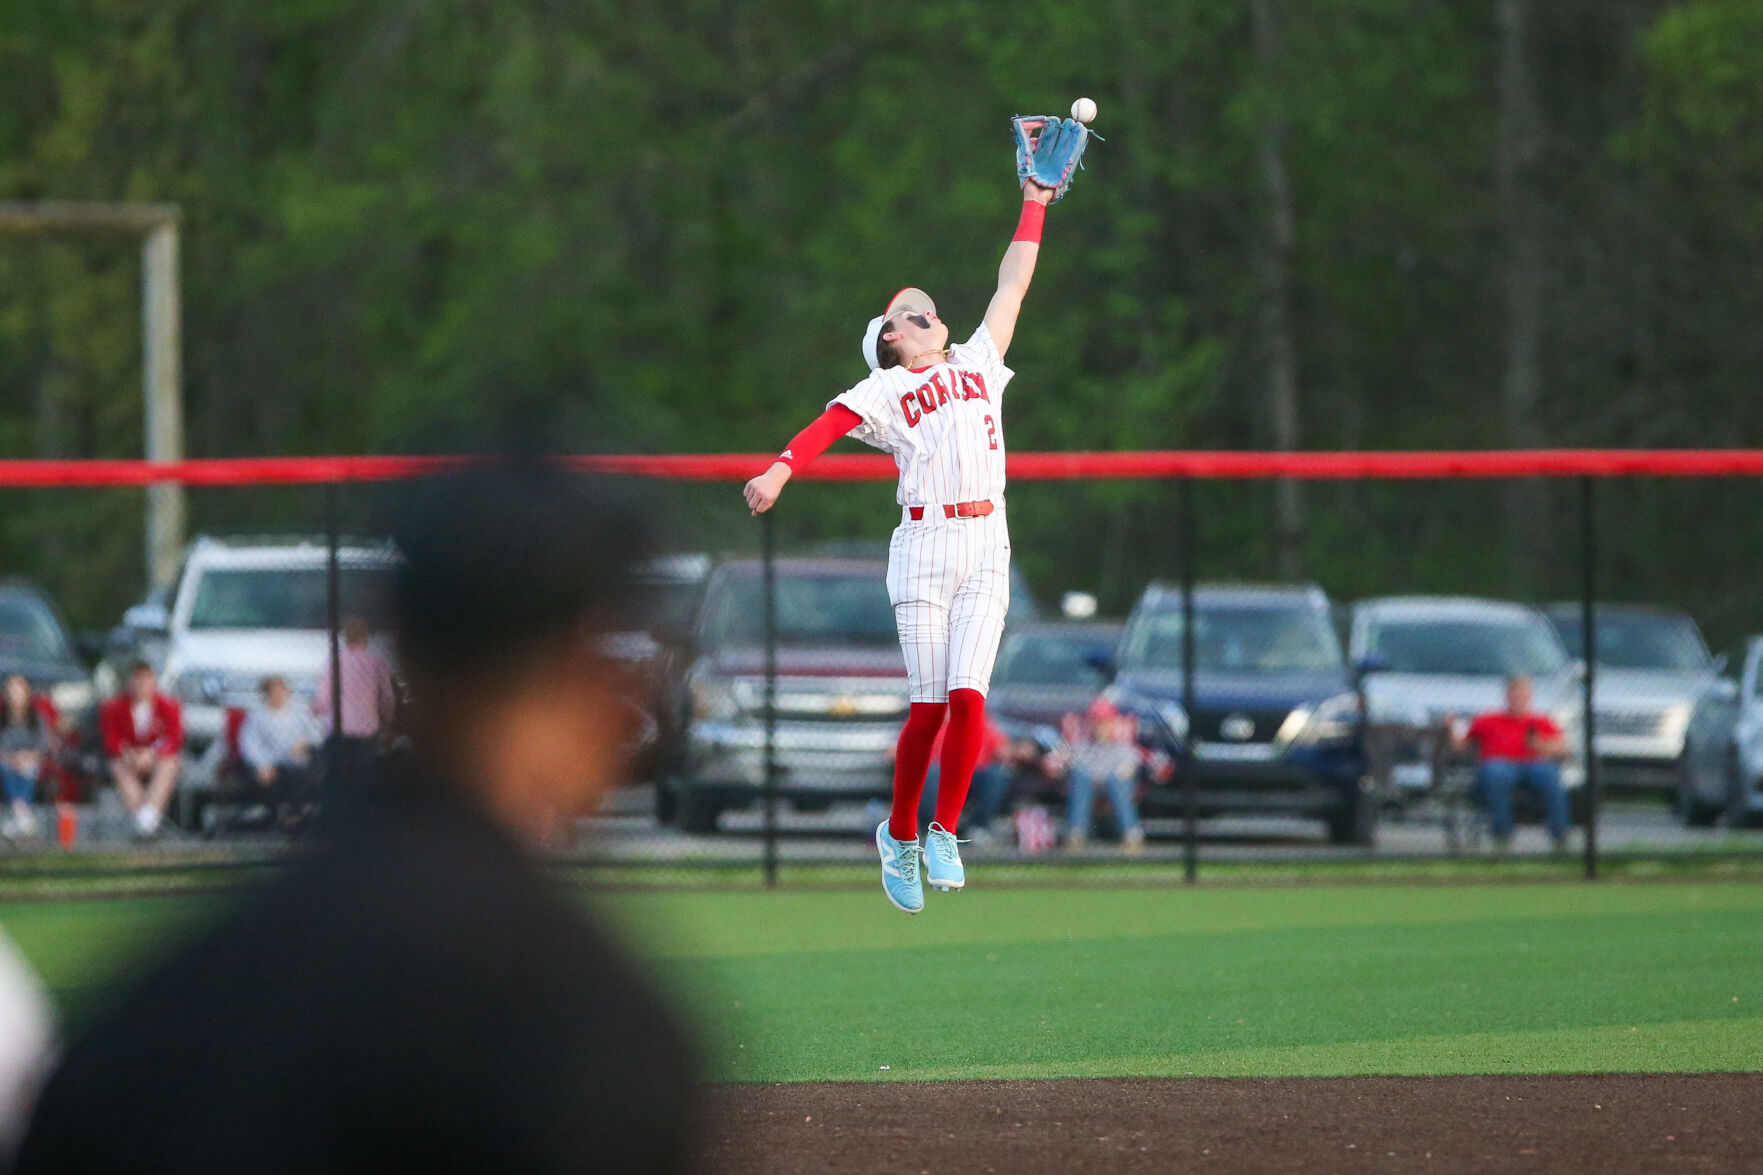 Three-run second inning leads to Corbin’s loss to Pikeville